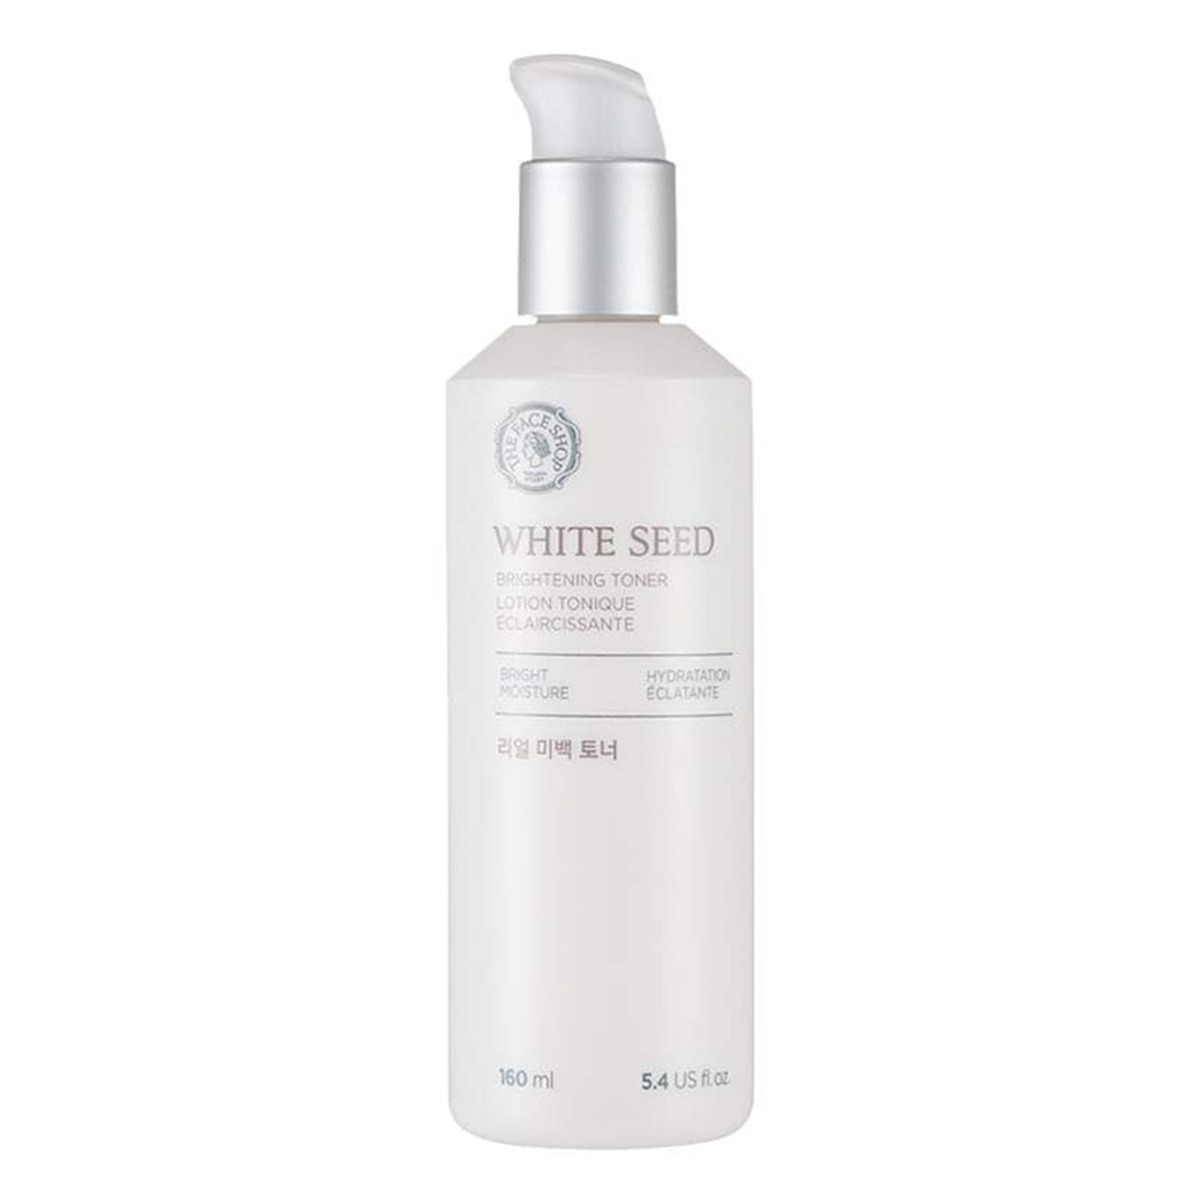 The Face Shop White Seed Brightening Toner, 160ml